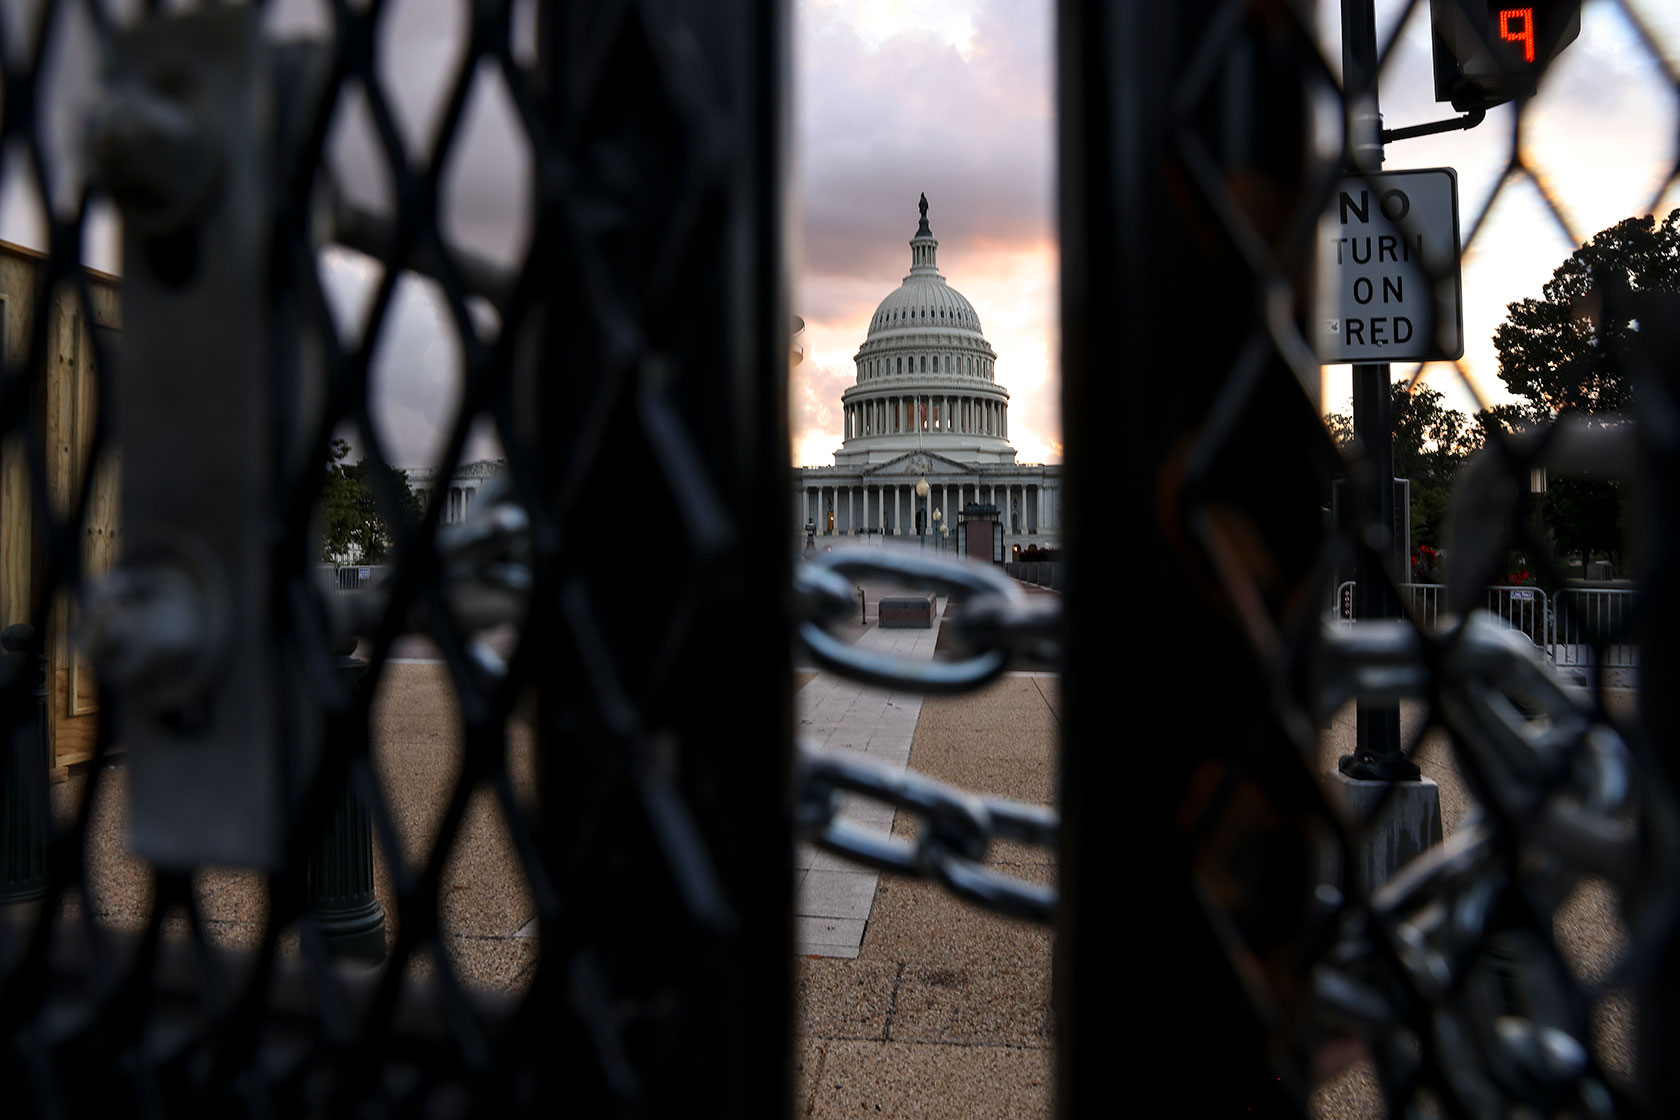 How would a potential government shutdown affect Social Security